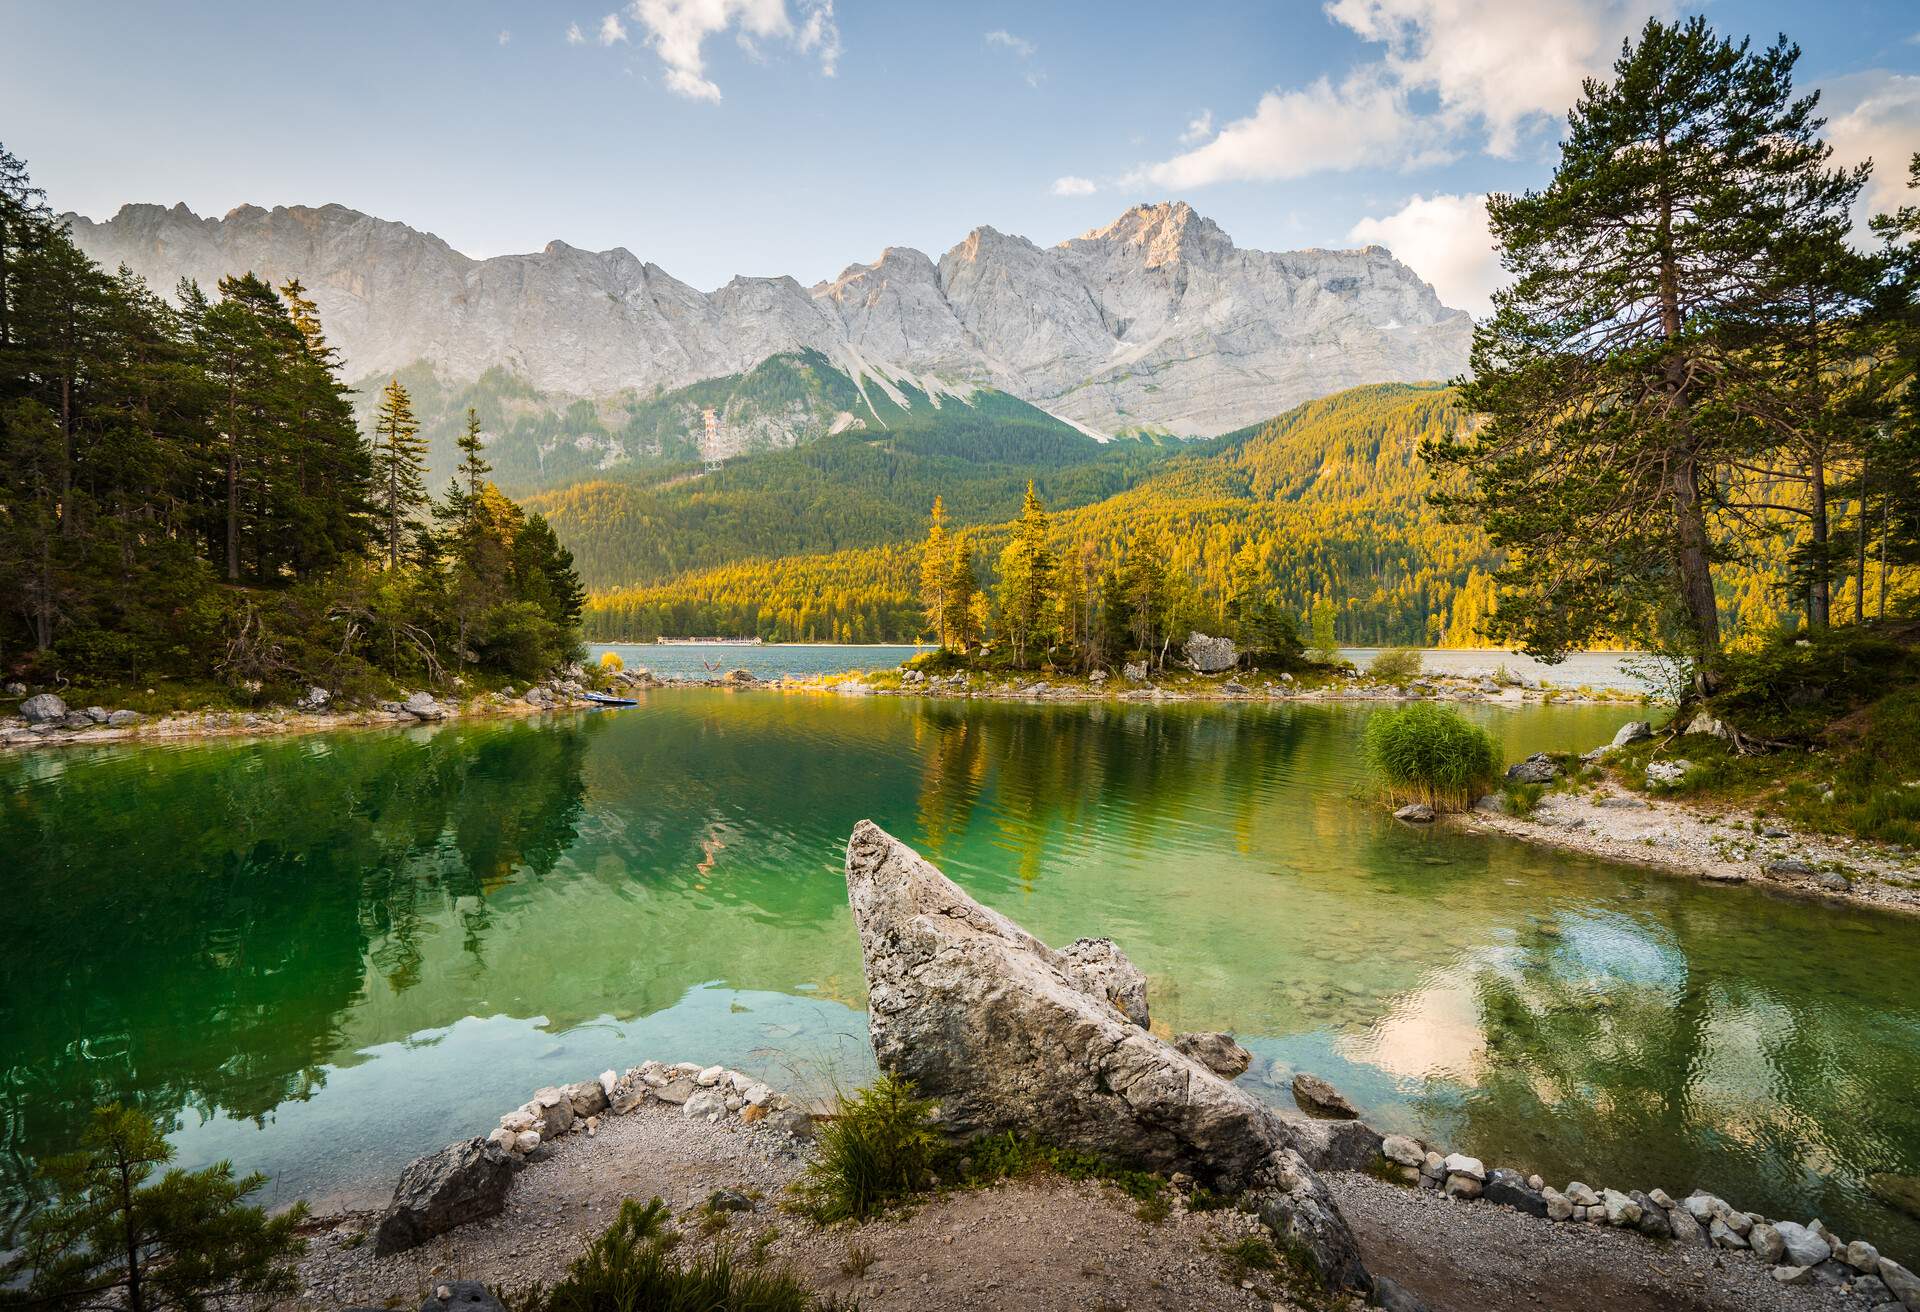 The sunrise at the lake Eibsee, Grainau, Oberbayern, Deutschland with a view to the Wettersteingebirge and the Zugspitze, the highest peak in Germany.